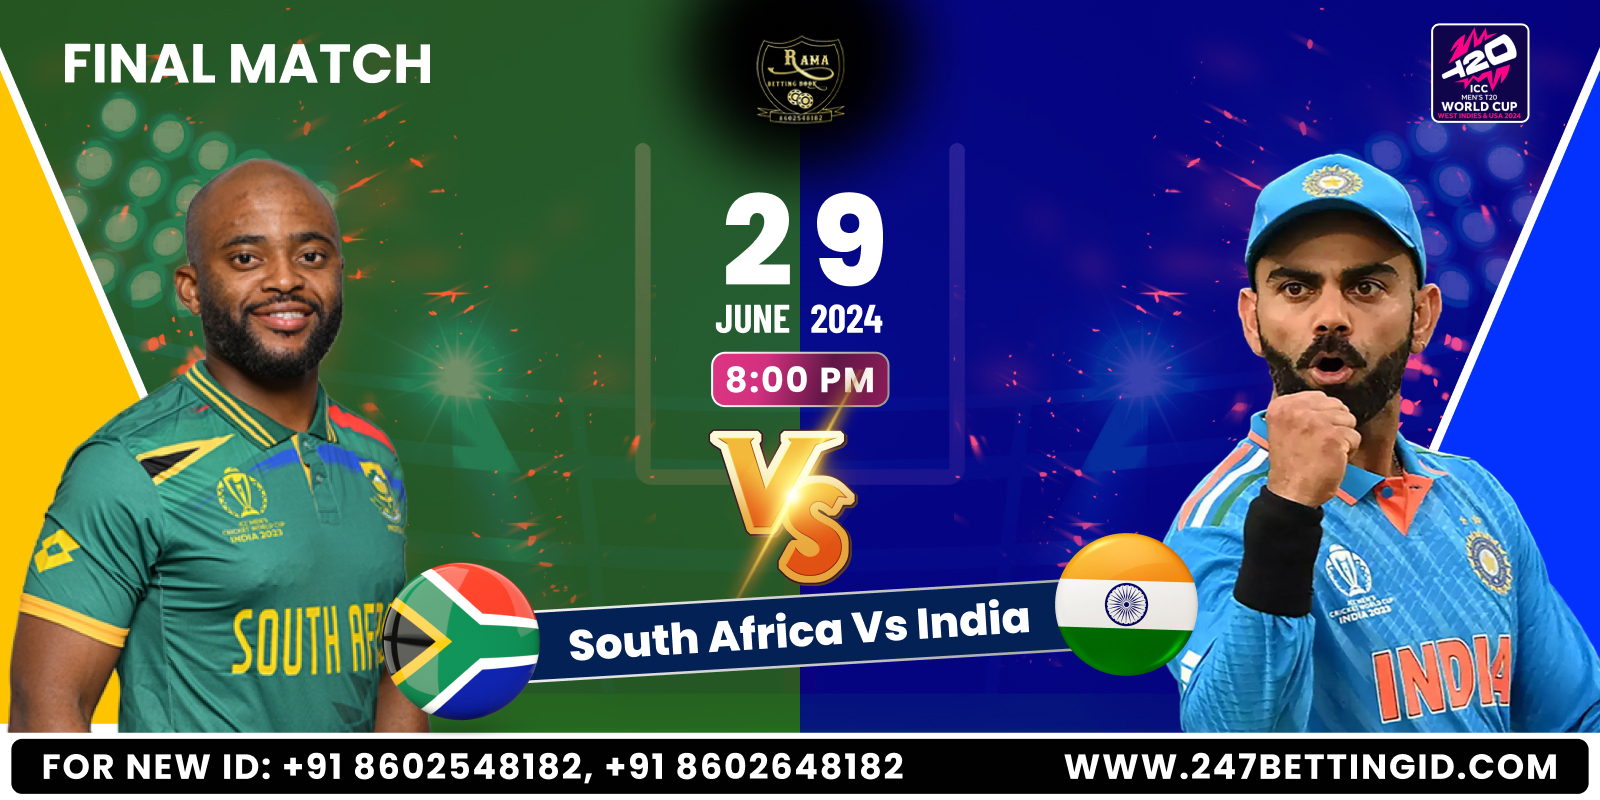 South Africa vs India T20 World Cup Final: Today’s Match Prediction 